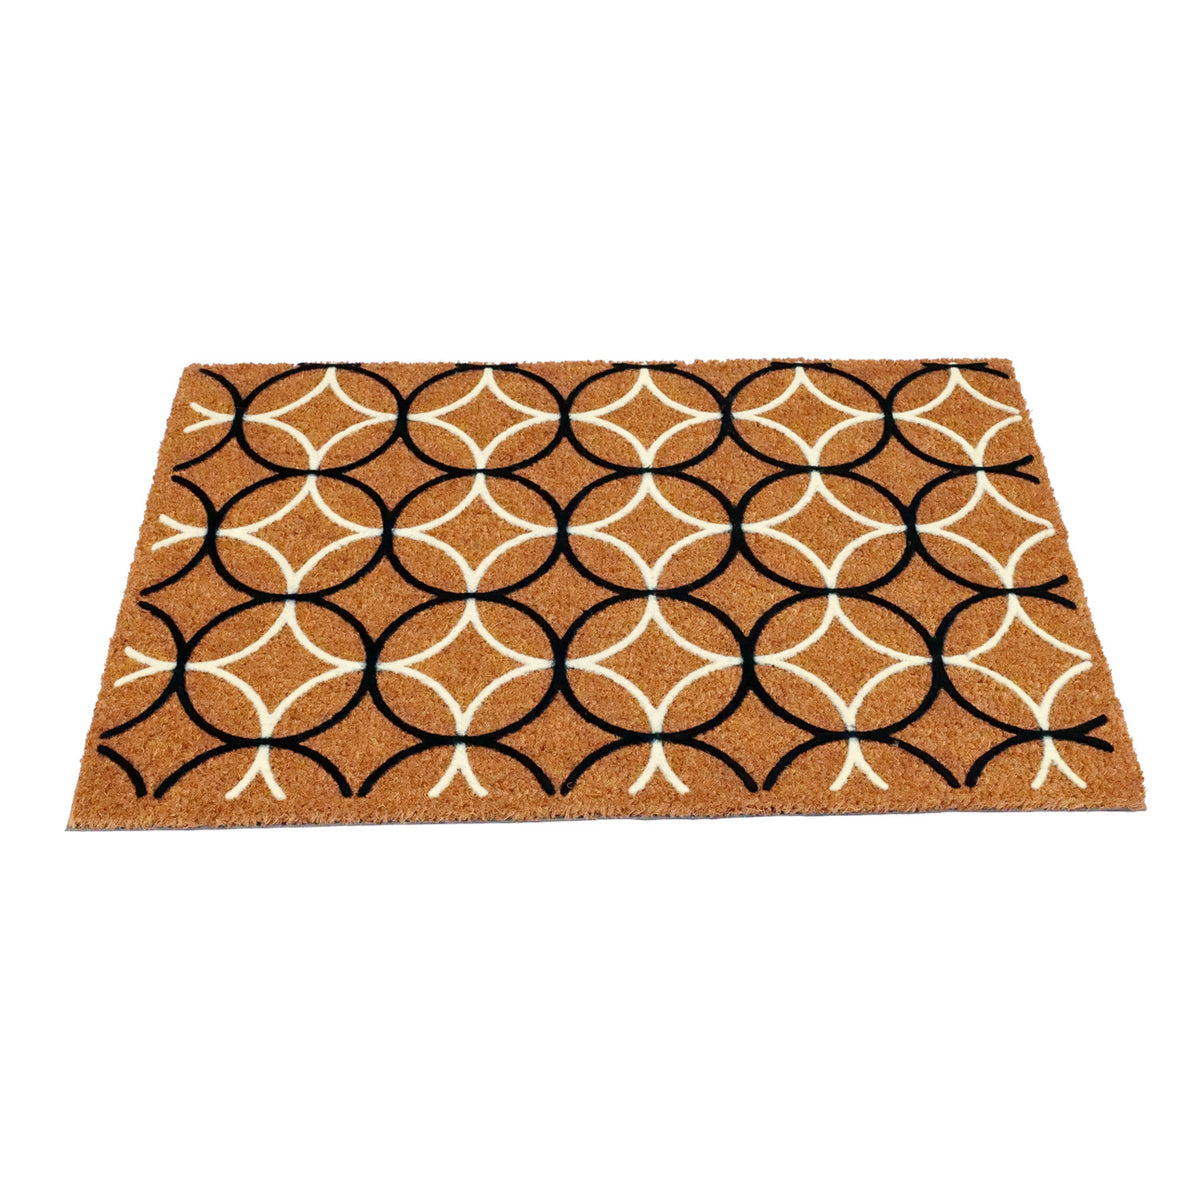 Swiss Flocked Circle Pattern Coir Mat - Azo-Free Print with Fade-Proof and Rubs-Resistance Features